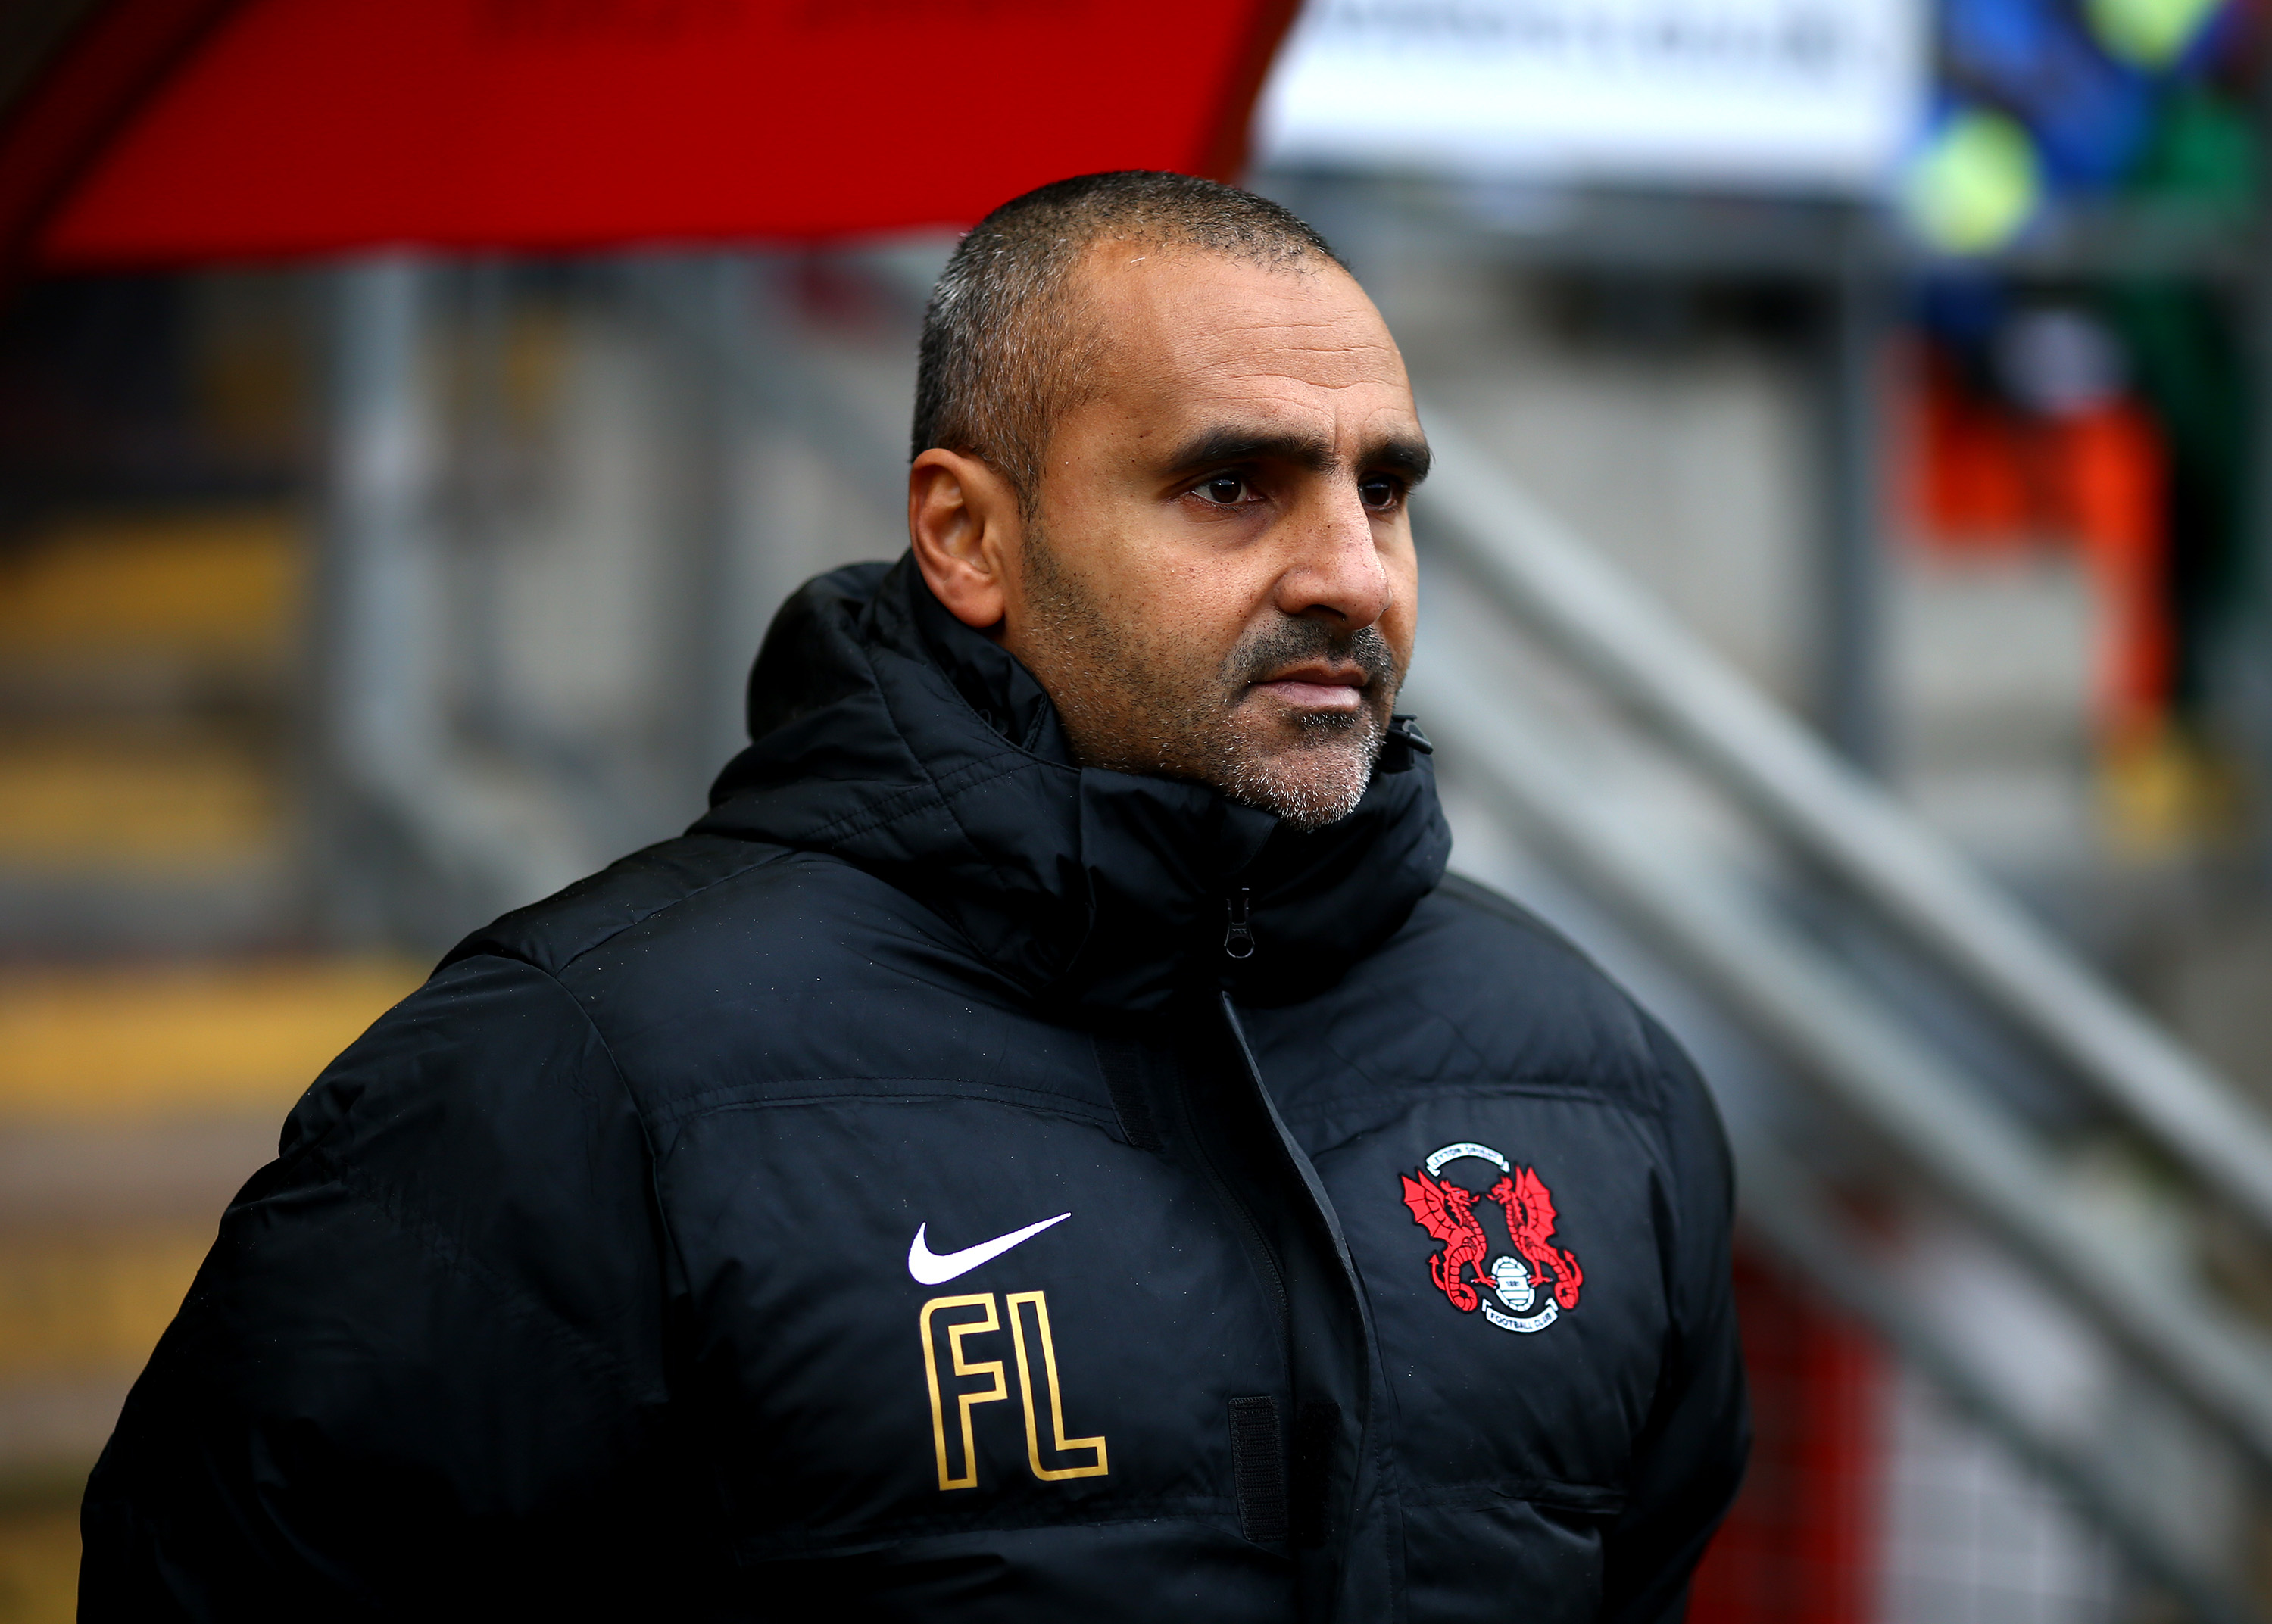 LONDON, ENGLAND - JANUARY 31: Leyton Orient manager Fabio Liverani during the Sky Bet League One match between Leyton Orient and Scunthorpe United at The Matchroom Stadium on January 31, 2015 in London, England. (Photo by Charlie Crowhurst/Getty Images)